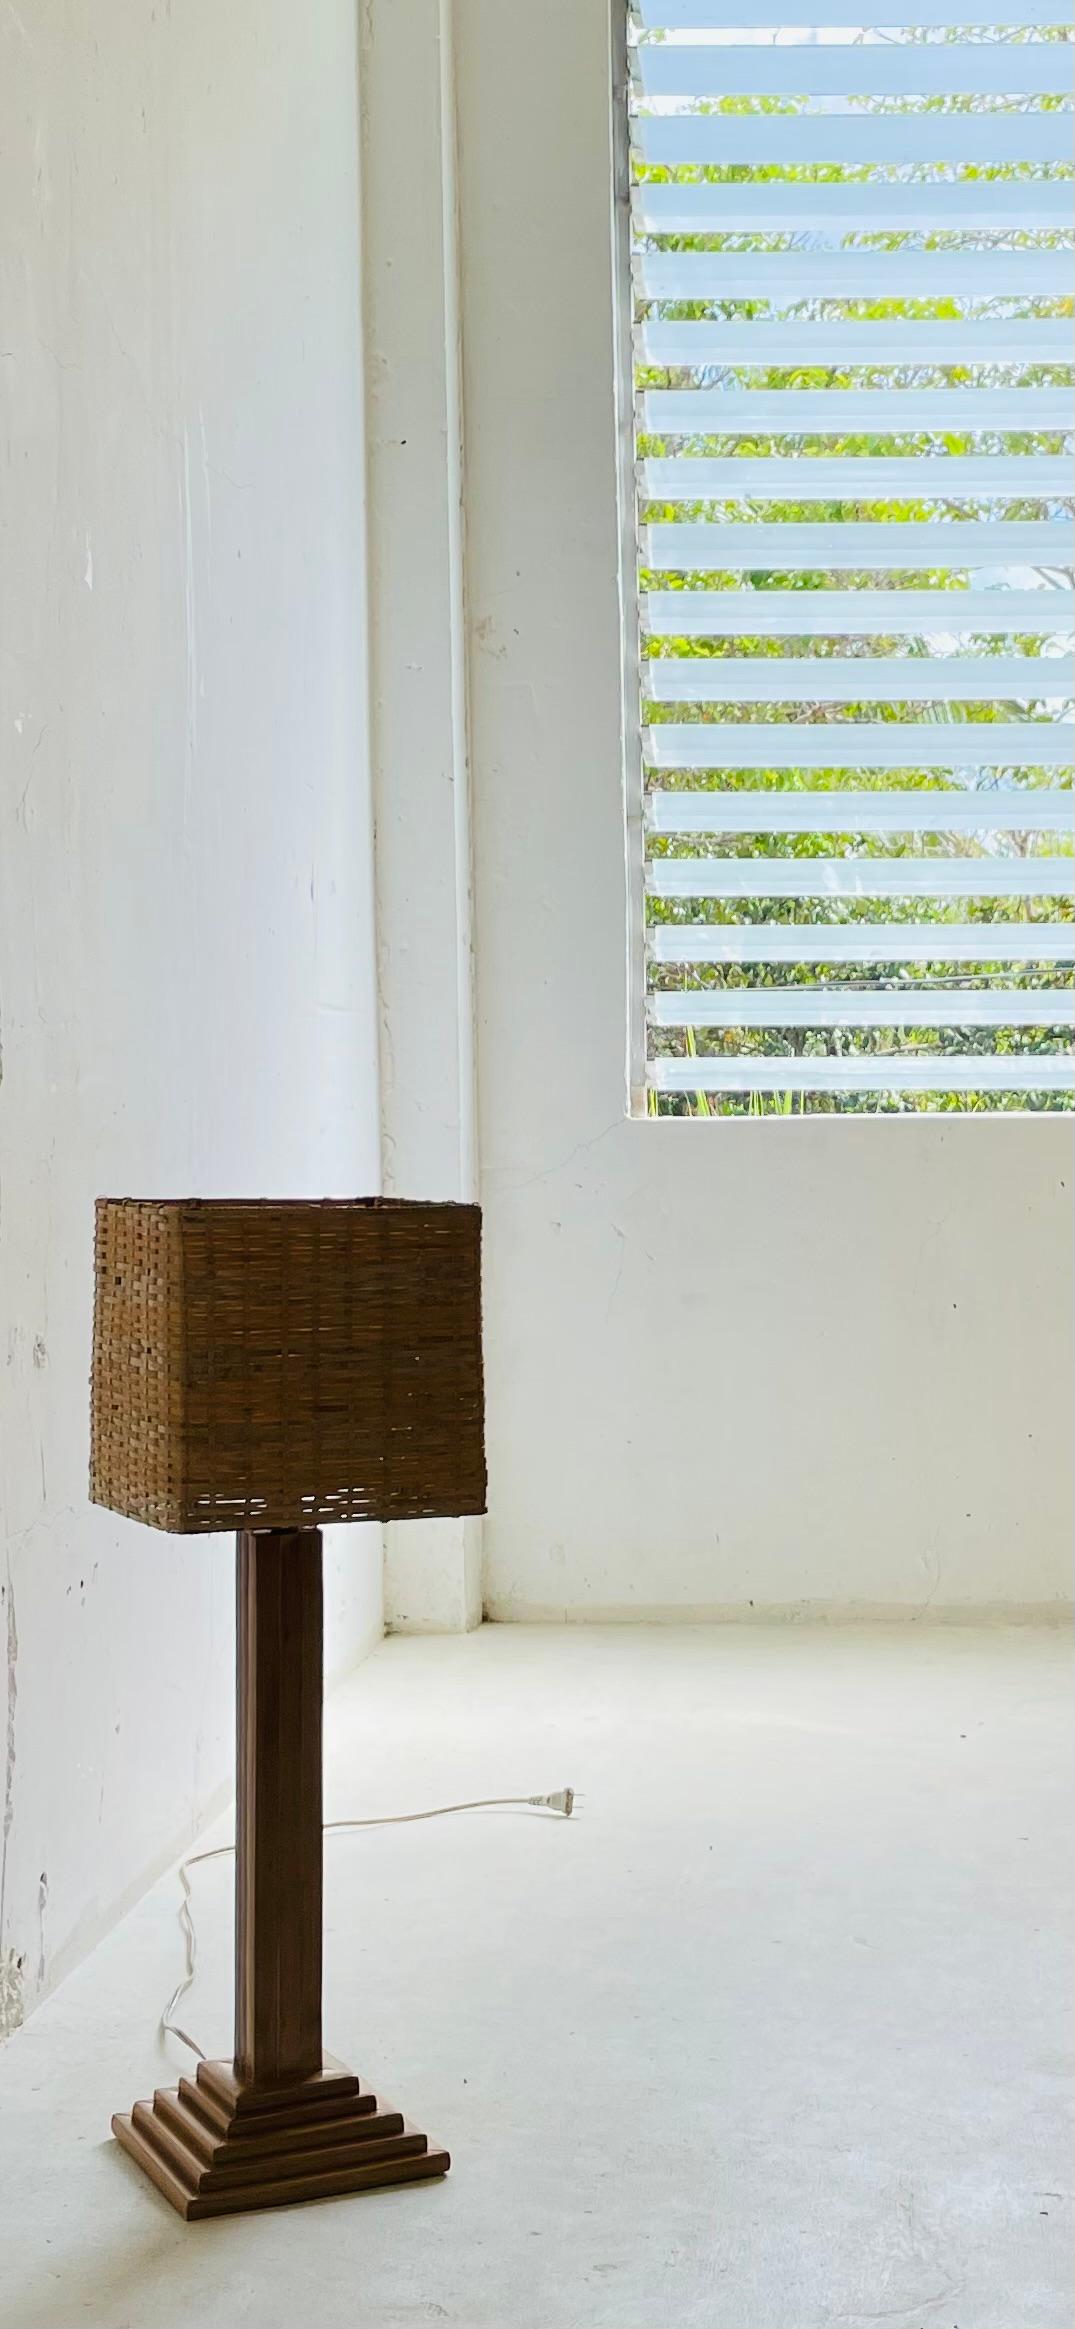 Step' table lamp, style of Peter Blake. from fine strips of bamboo cube shade is woven bamboo original from Peter Blake 1987. Fabulous modernist mid-century feel to this lamp fanatic proportions.

lamp  

52cm high without shade
70cm with shade